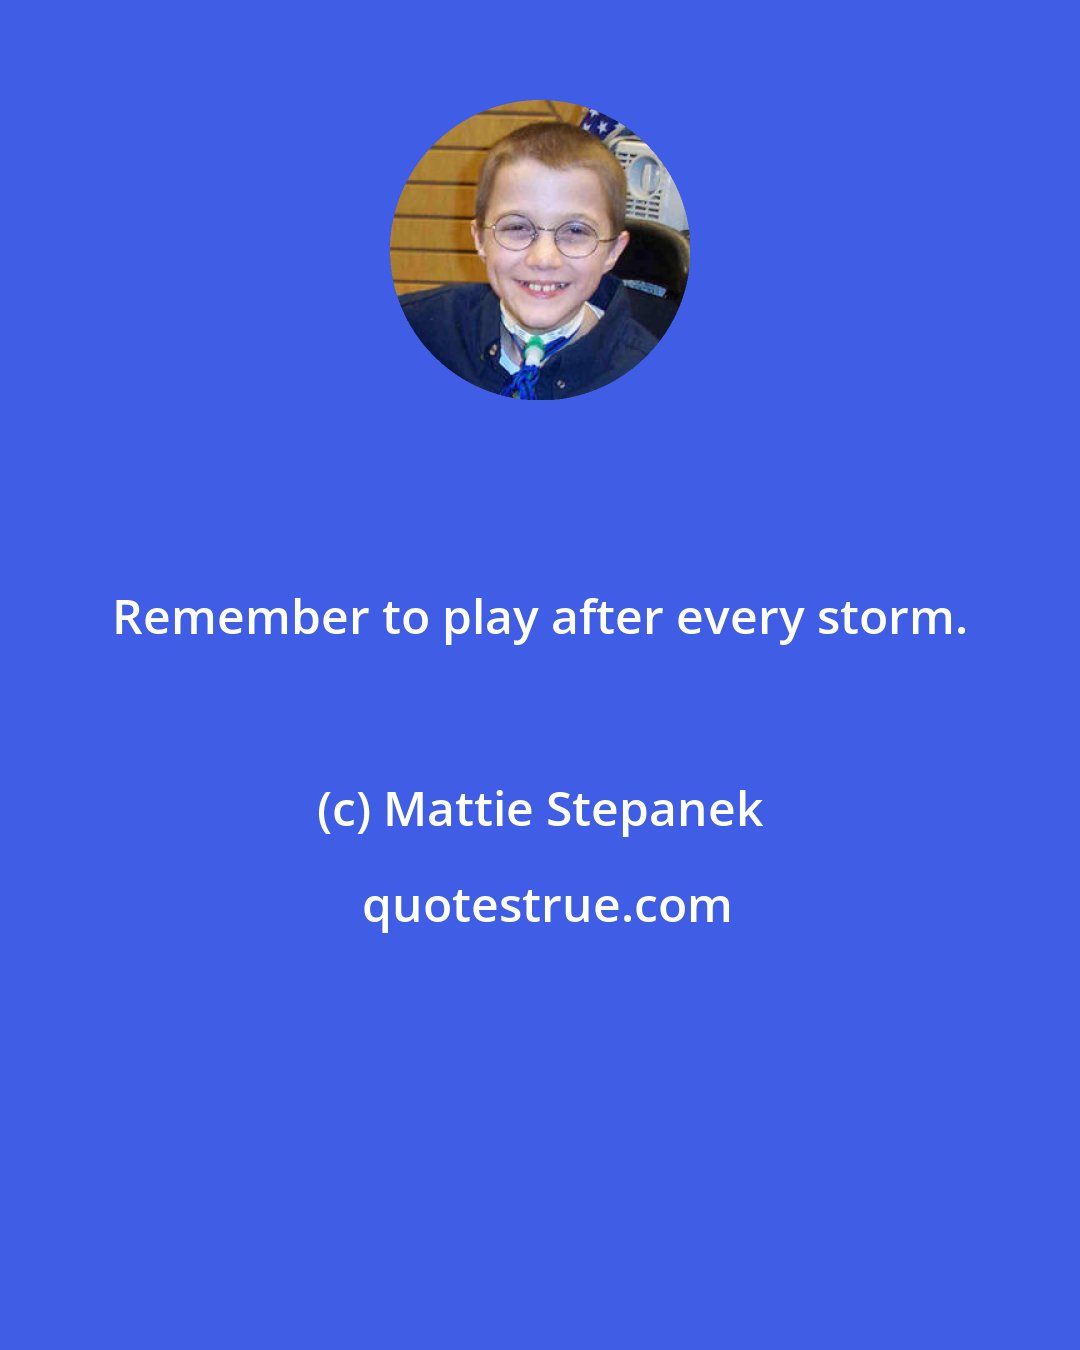 Mattie Stepanek: Remember to play after every storm.